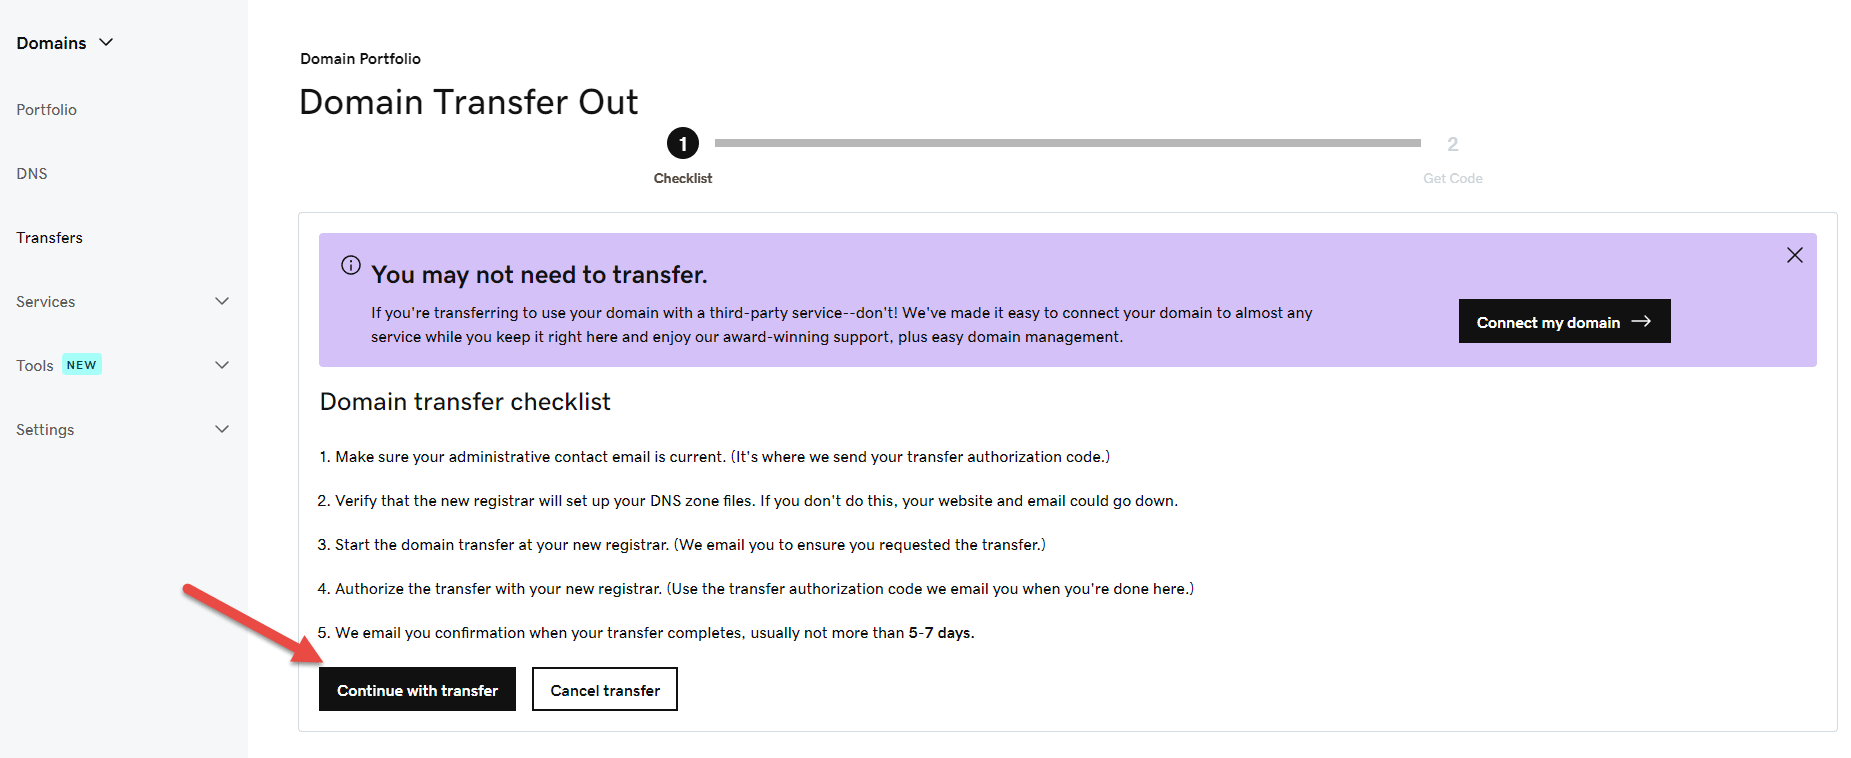 GoDaddy domain transfer checklist with arrow pointing to "Continue with transfer" button.